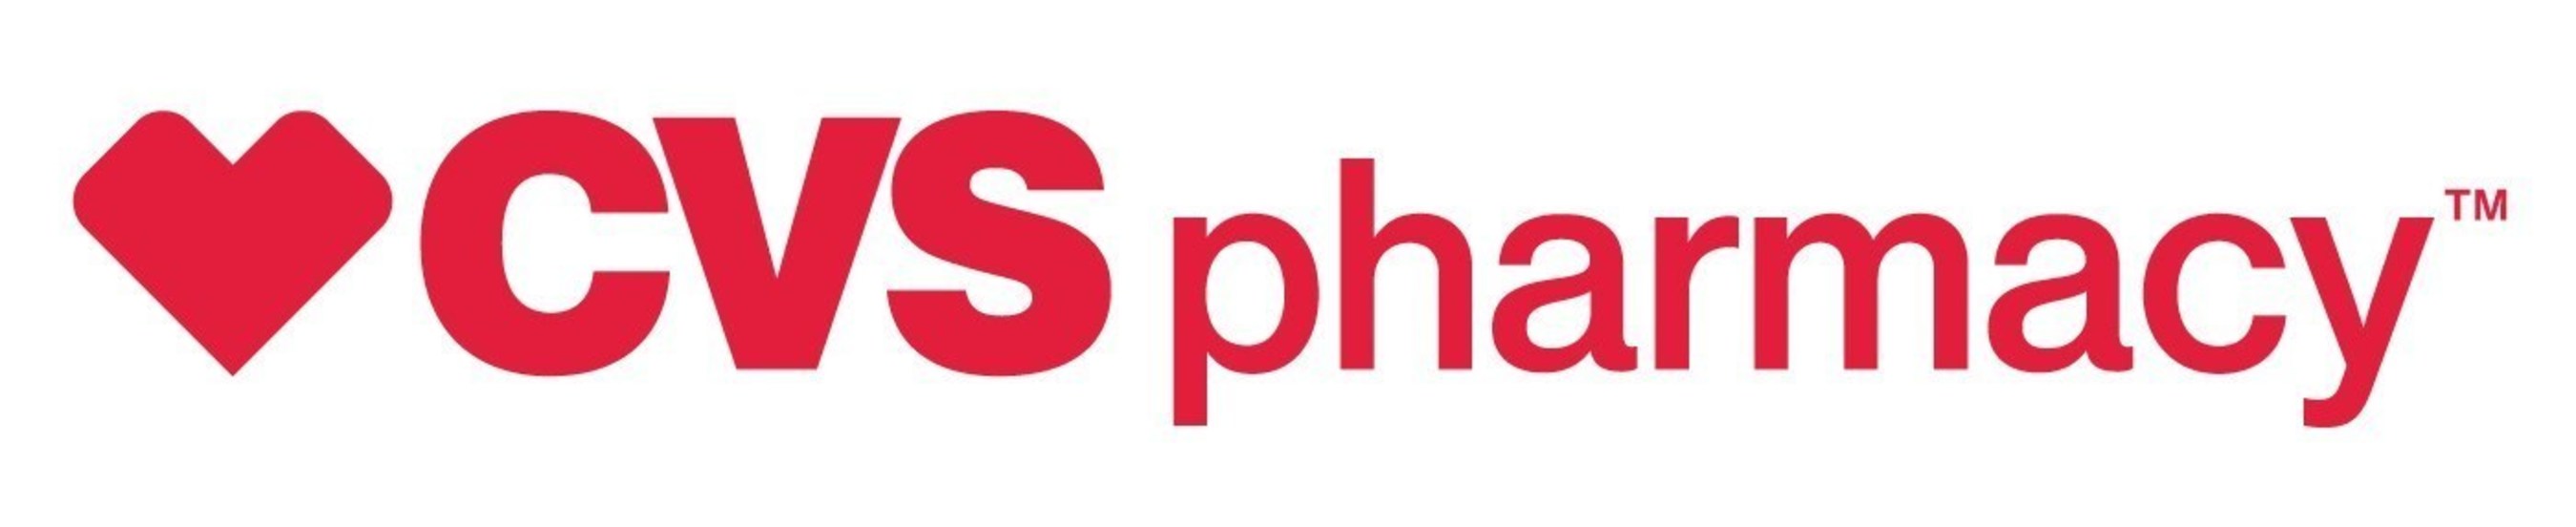 cvs pharmacy to help patients understand health insurance options during medicare part d open